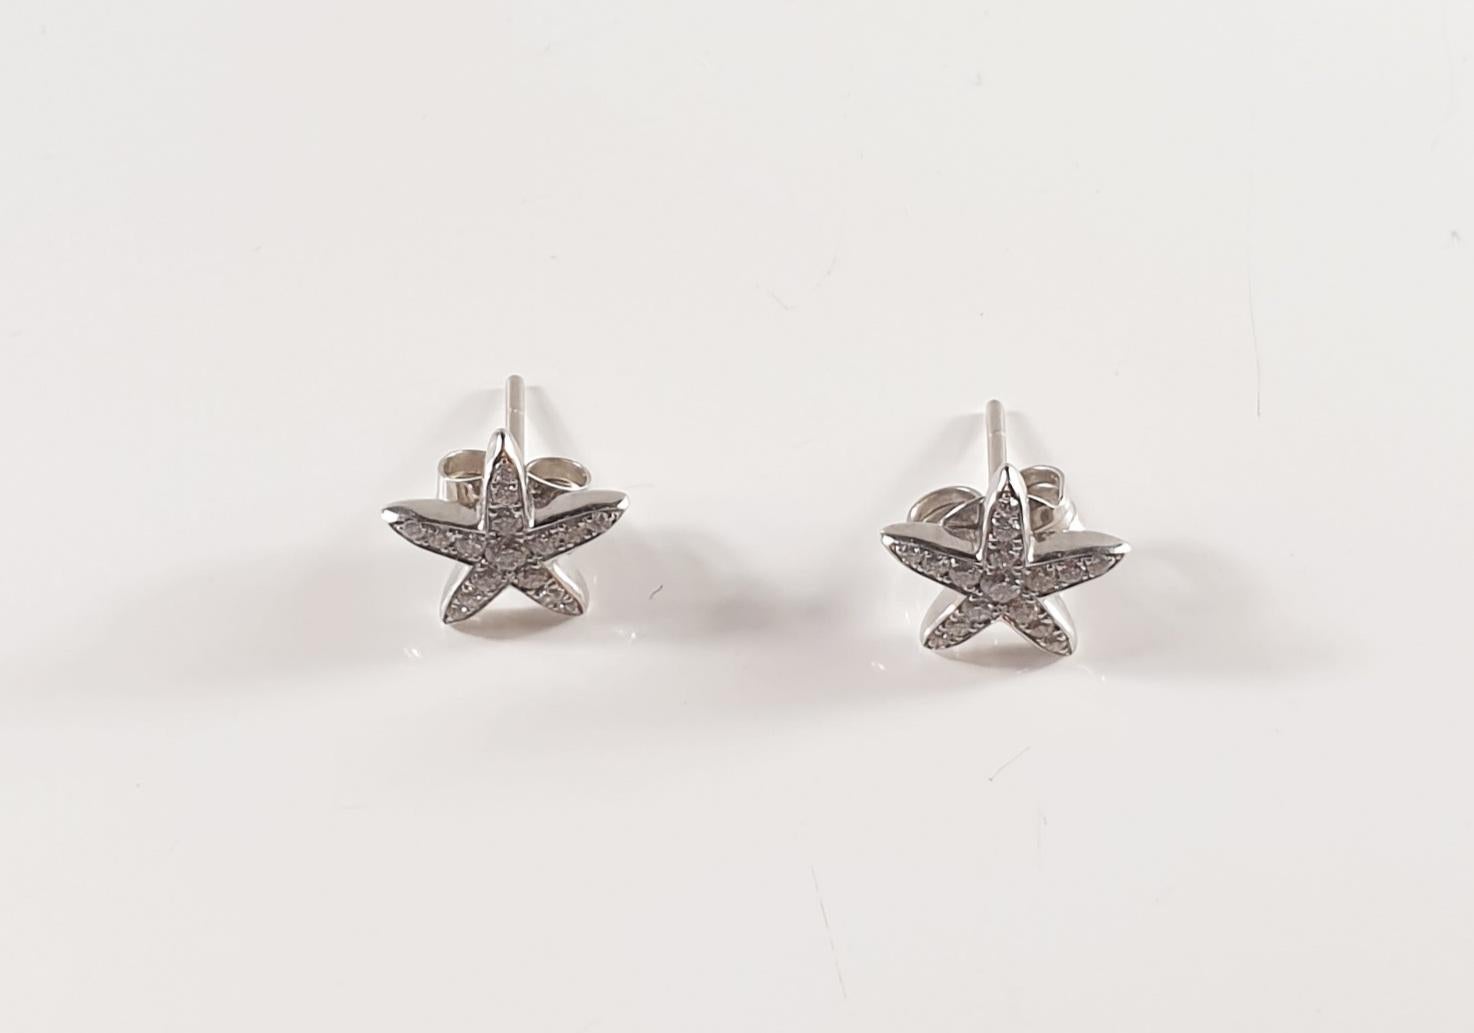 Sea Star collection, inspired in the Mediterranean sea colours...
Options metals 2 colours, , yellow and white 
READY TO SHIP
*Shipment of this piece is not affected by COVID-19. Orders welcome!*

STONES
◘ 15 -0.01ct and 1 -0.025ct total 0.175ct